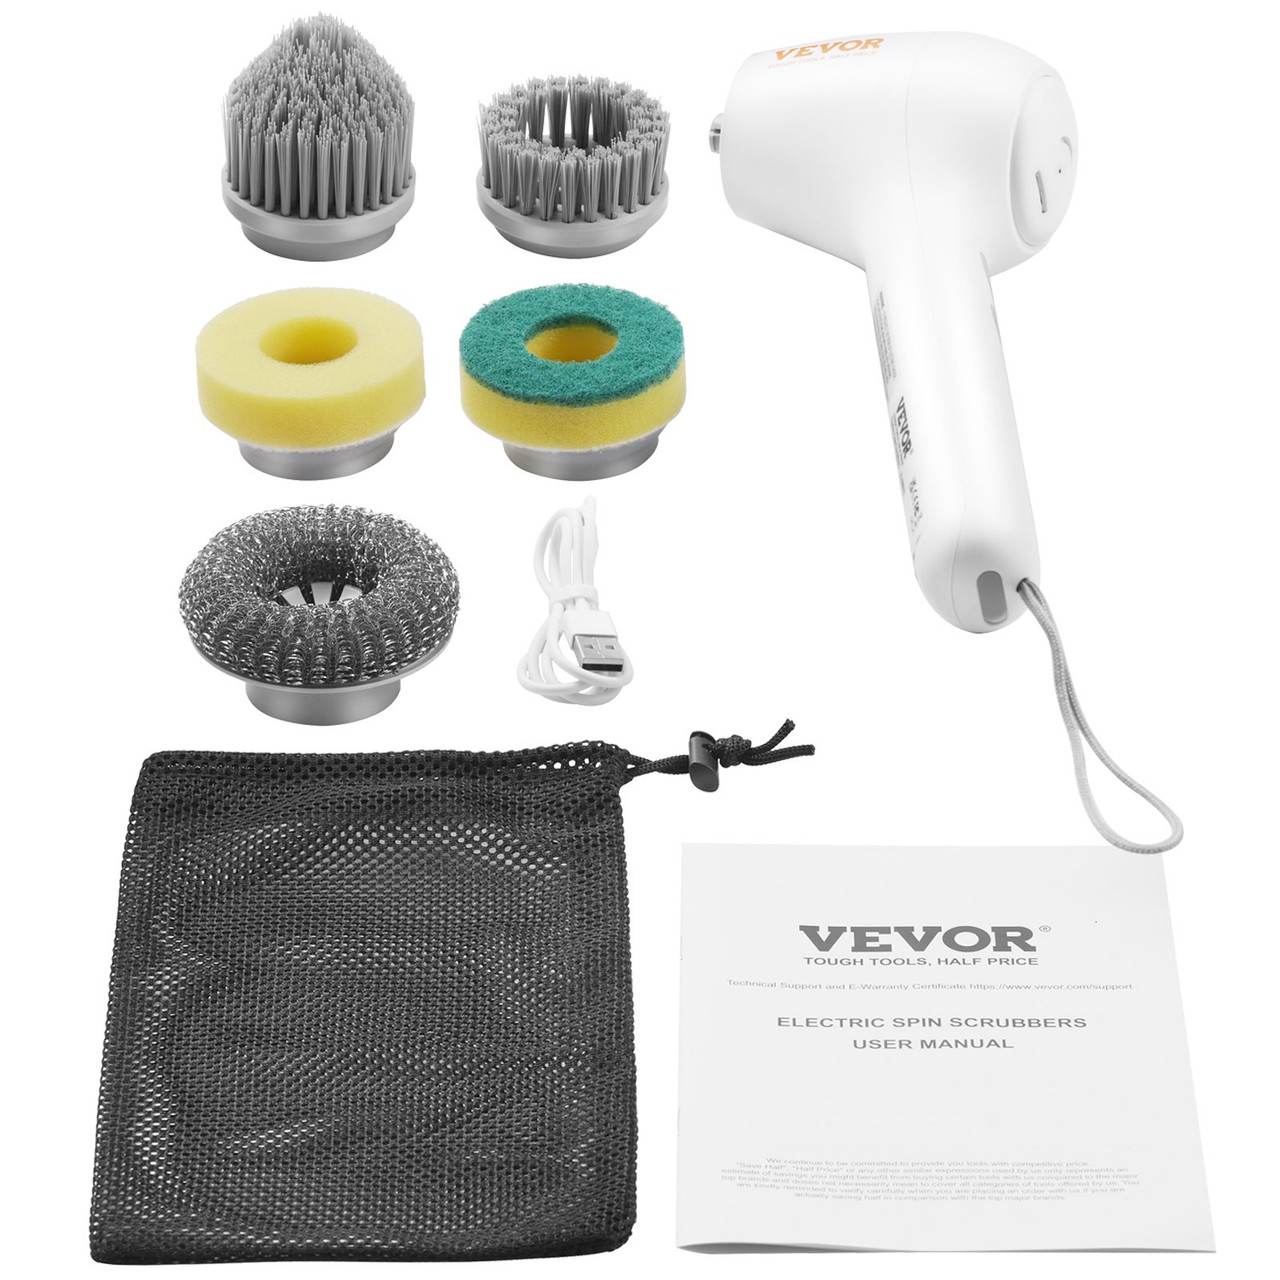 VEVOR Electric Spin Scrubber, Cordless Electric Cleaning Brush with Auto Detergent Dispenser & 2 Adjustable Speeds, Portable Power Shower Scrubber with 5 Replaceable Brush Heads for Bathroom, Tub